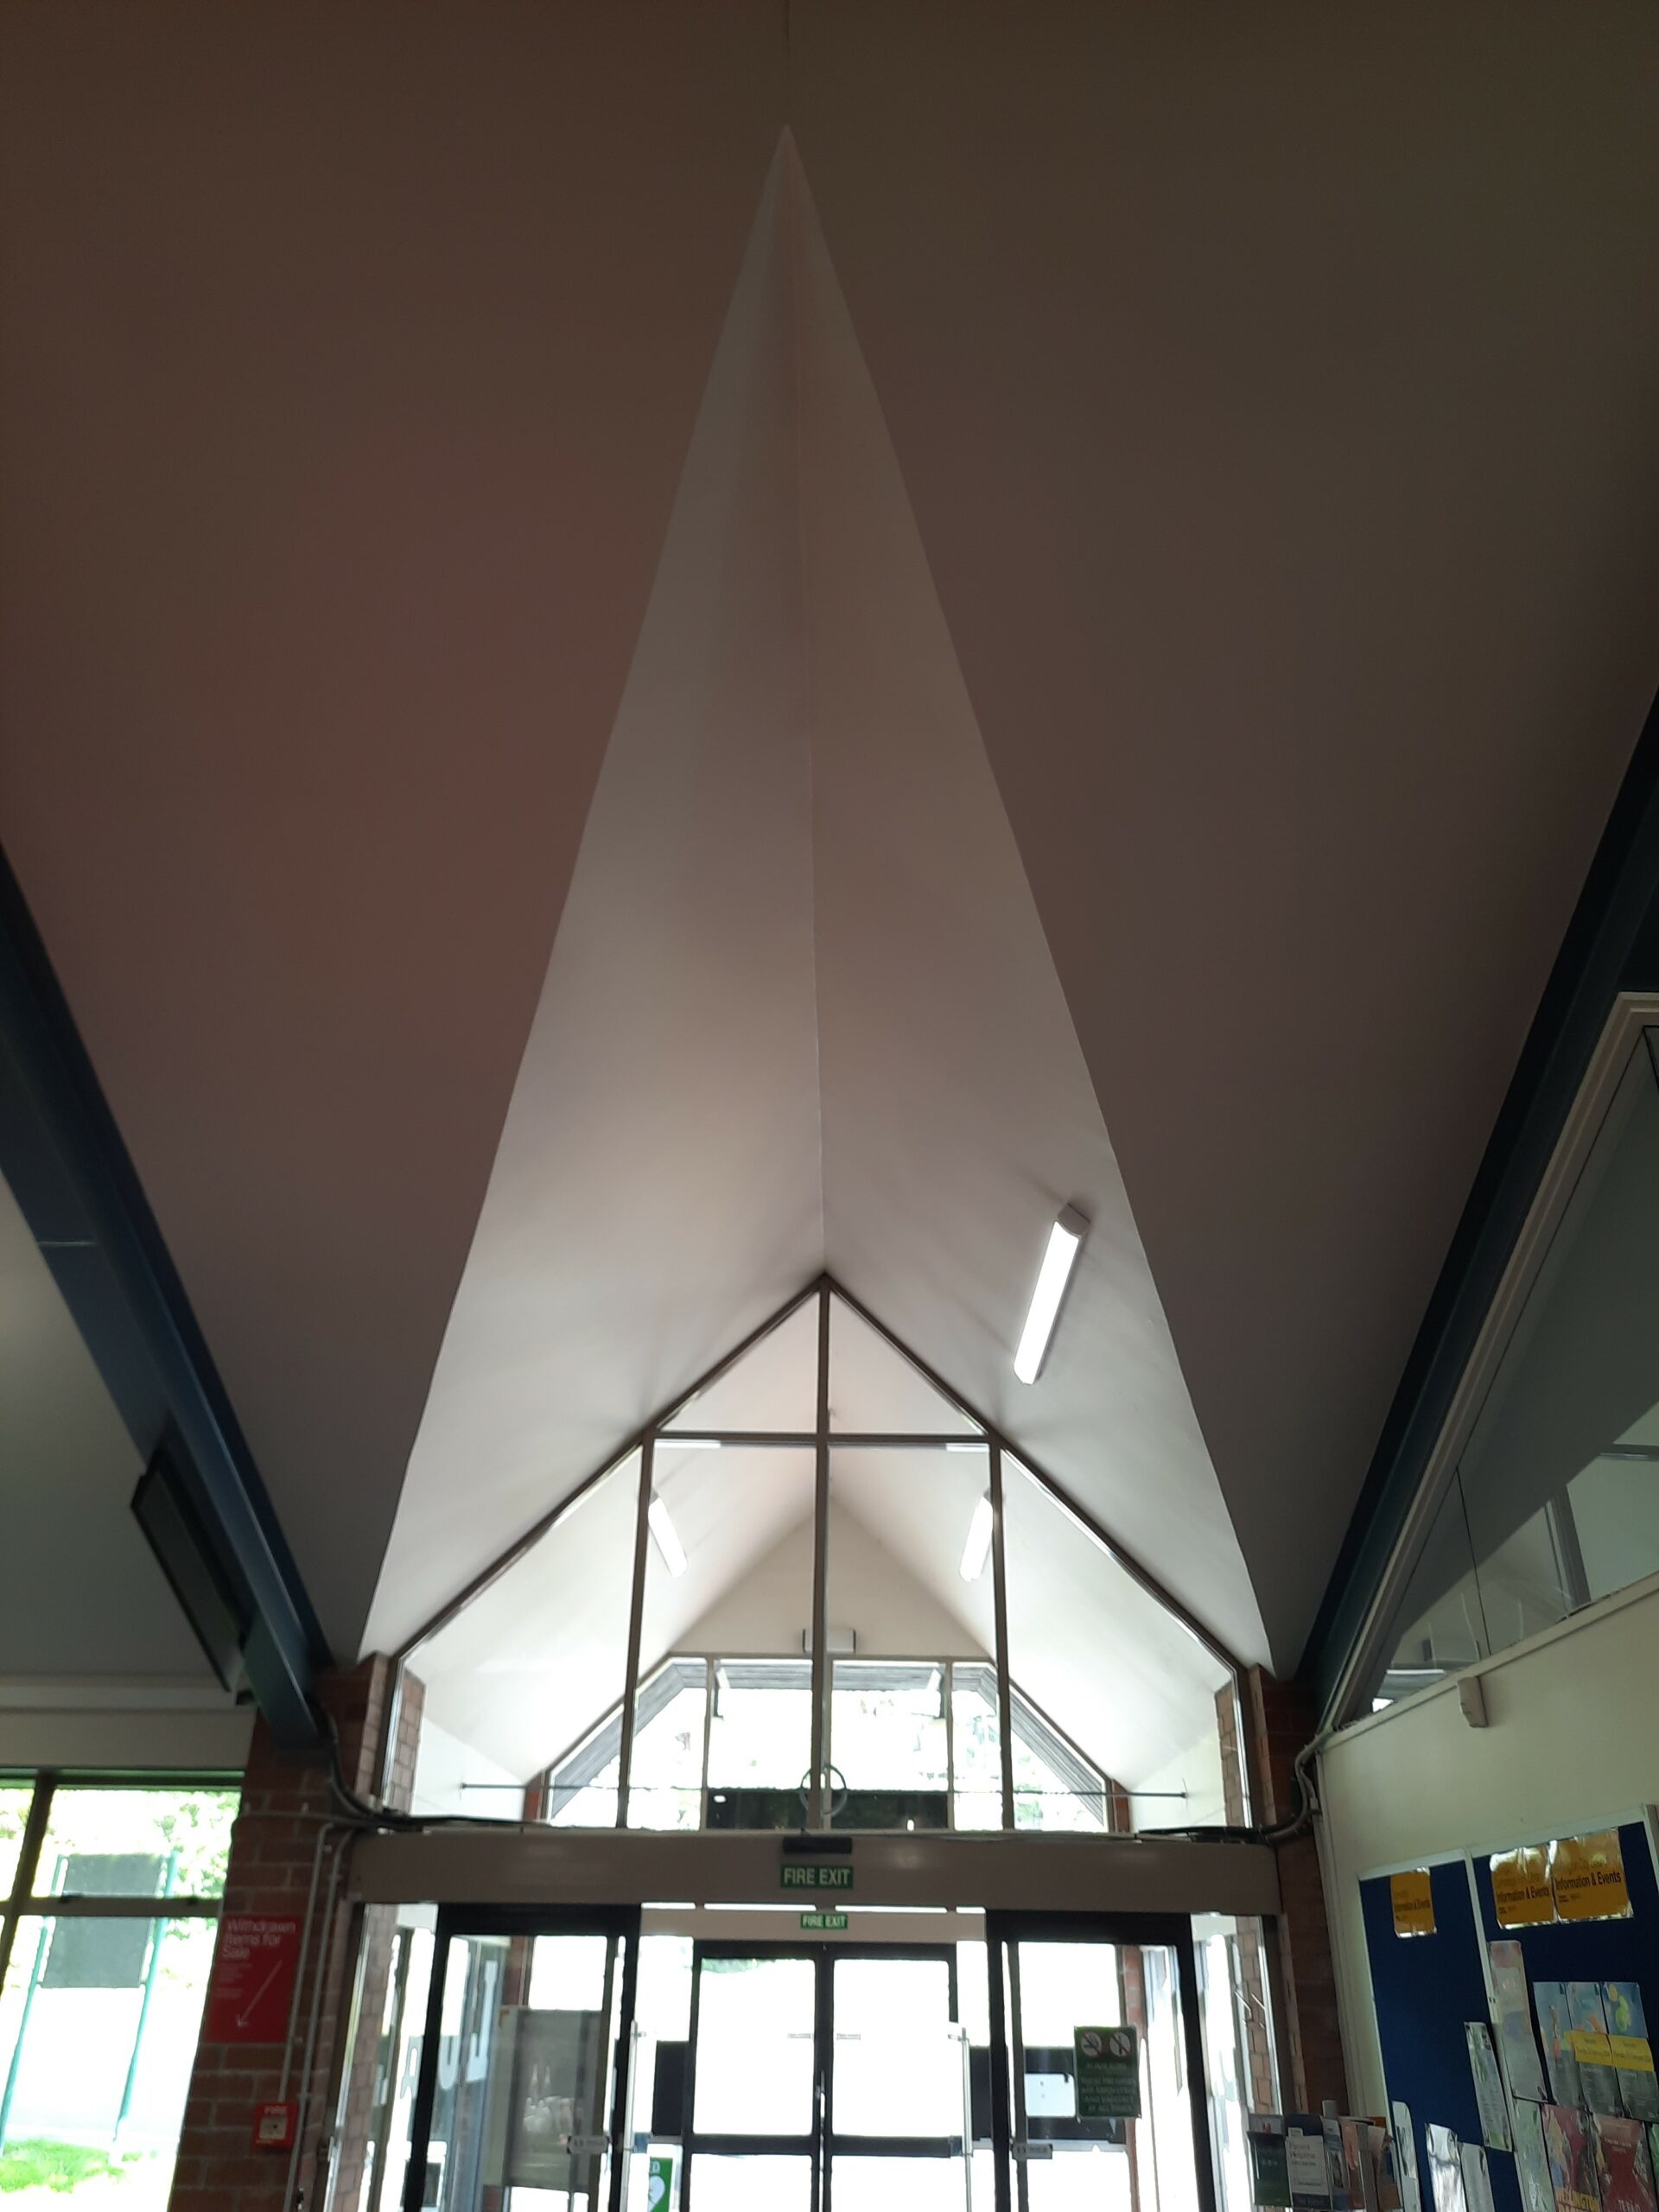 Towards the library entry/exit, and internal five-sided window sits in the pointed ceiling.